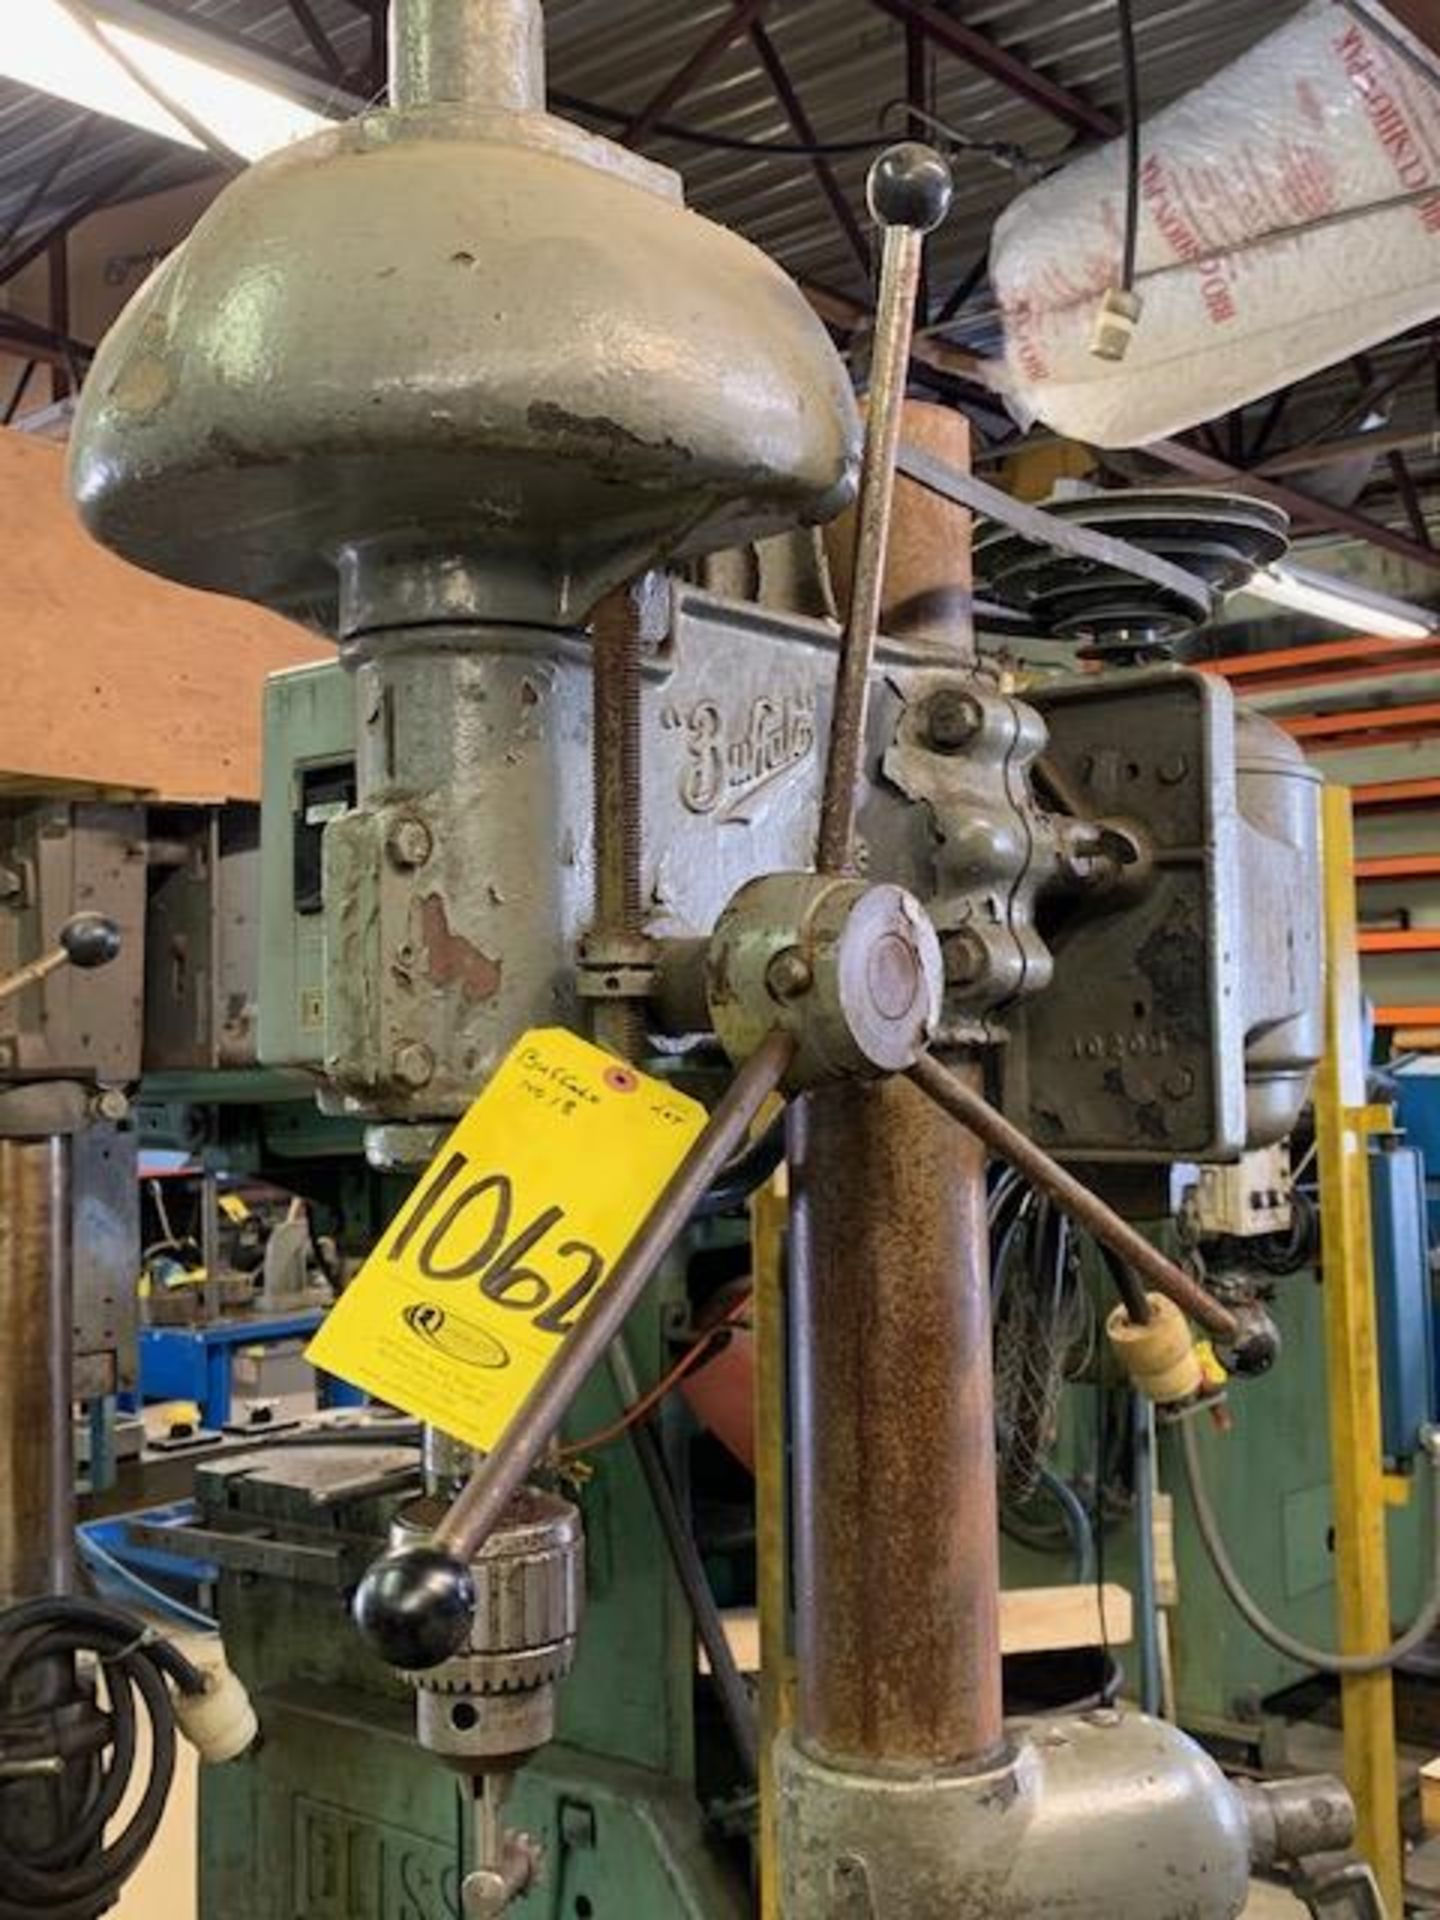 BUFFALO 18 IN. PEDESTAL DRILL PRESS W/JACOBS CHUCK - Image 2 of 3